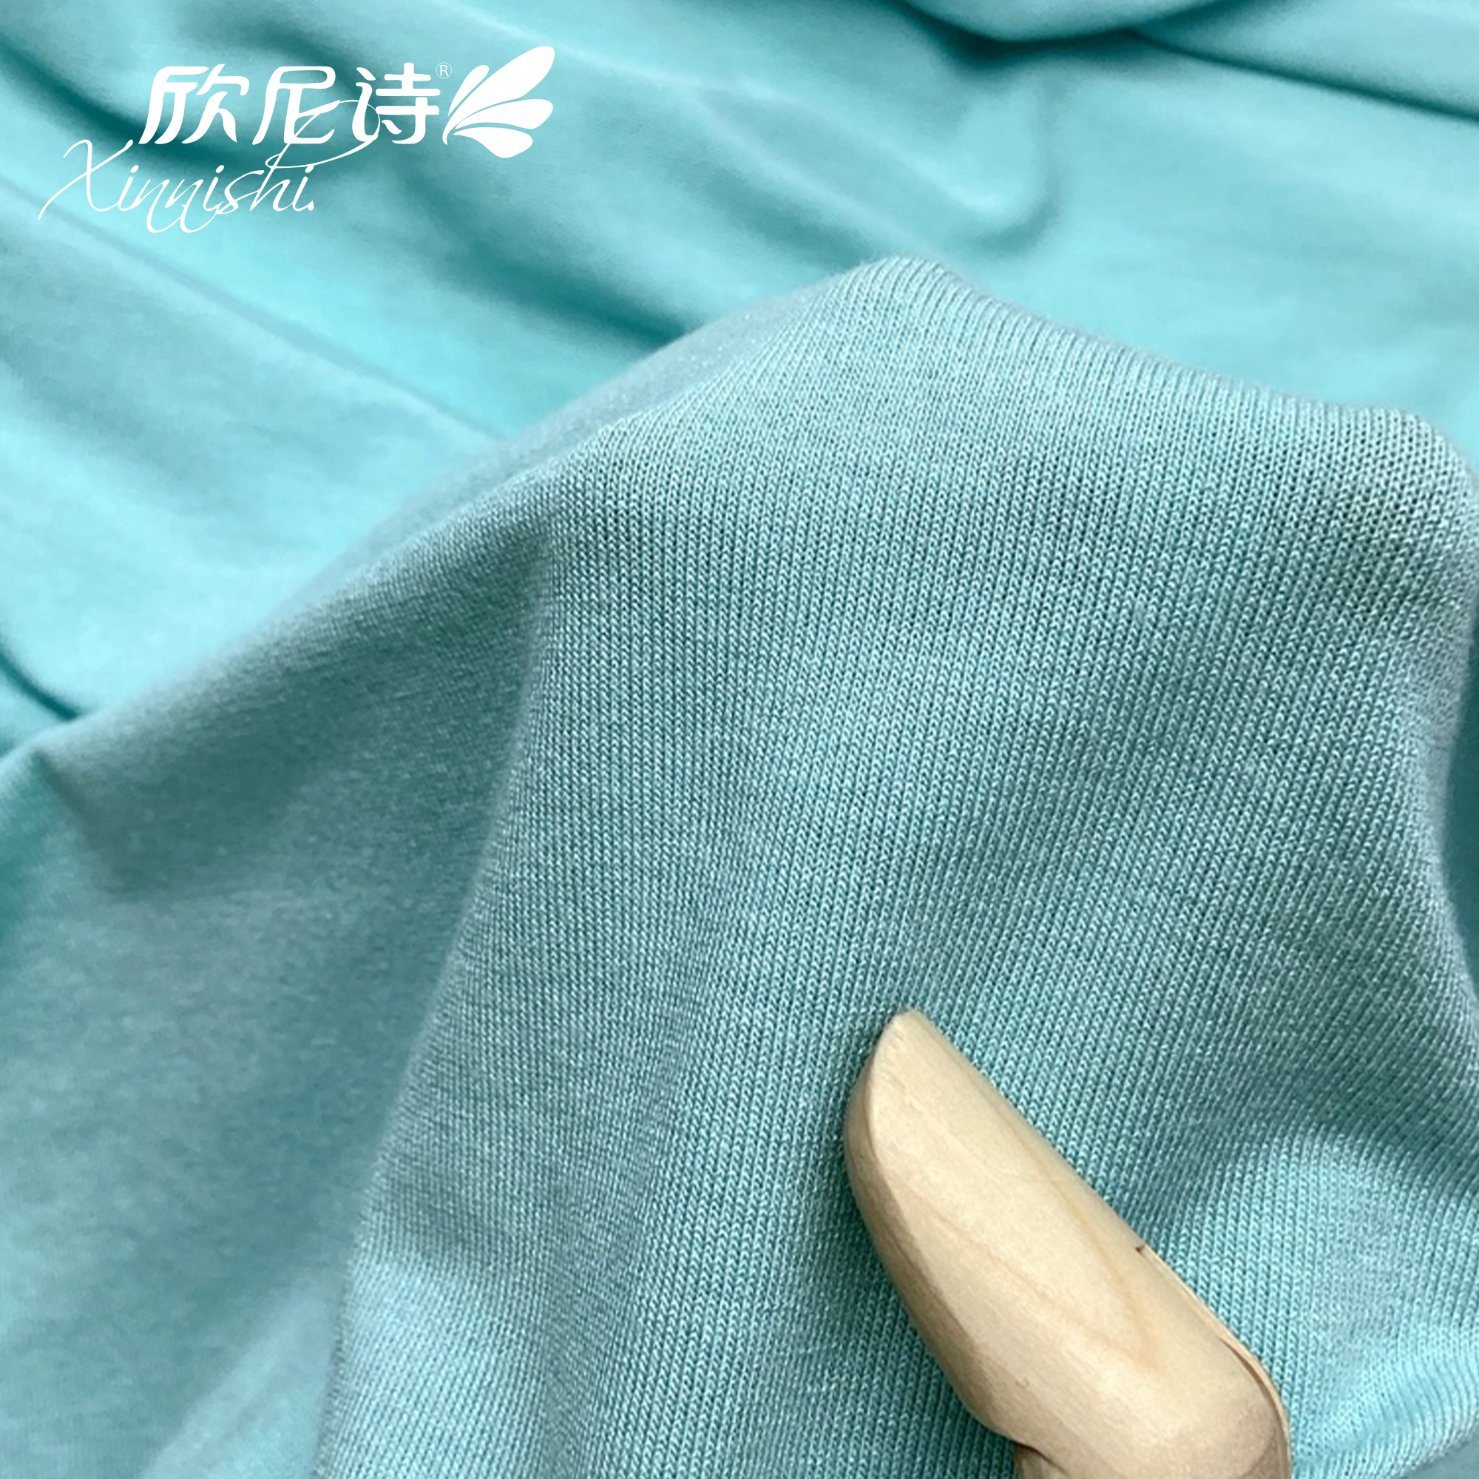 Comfortable Modal Stretch Elastic Knitted Sports Jersey Fabric 95%Modal  5%Spandex Plain Dyed Textile Fabric for Underwear Swimwear Fabric